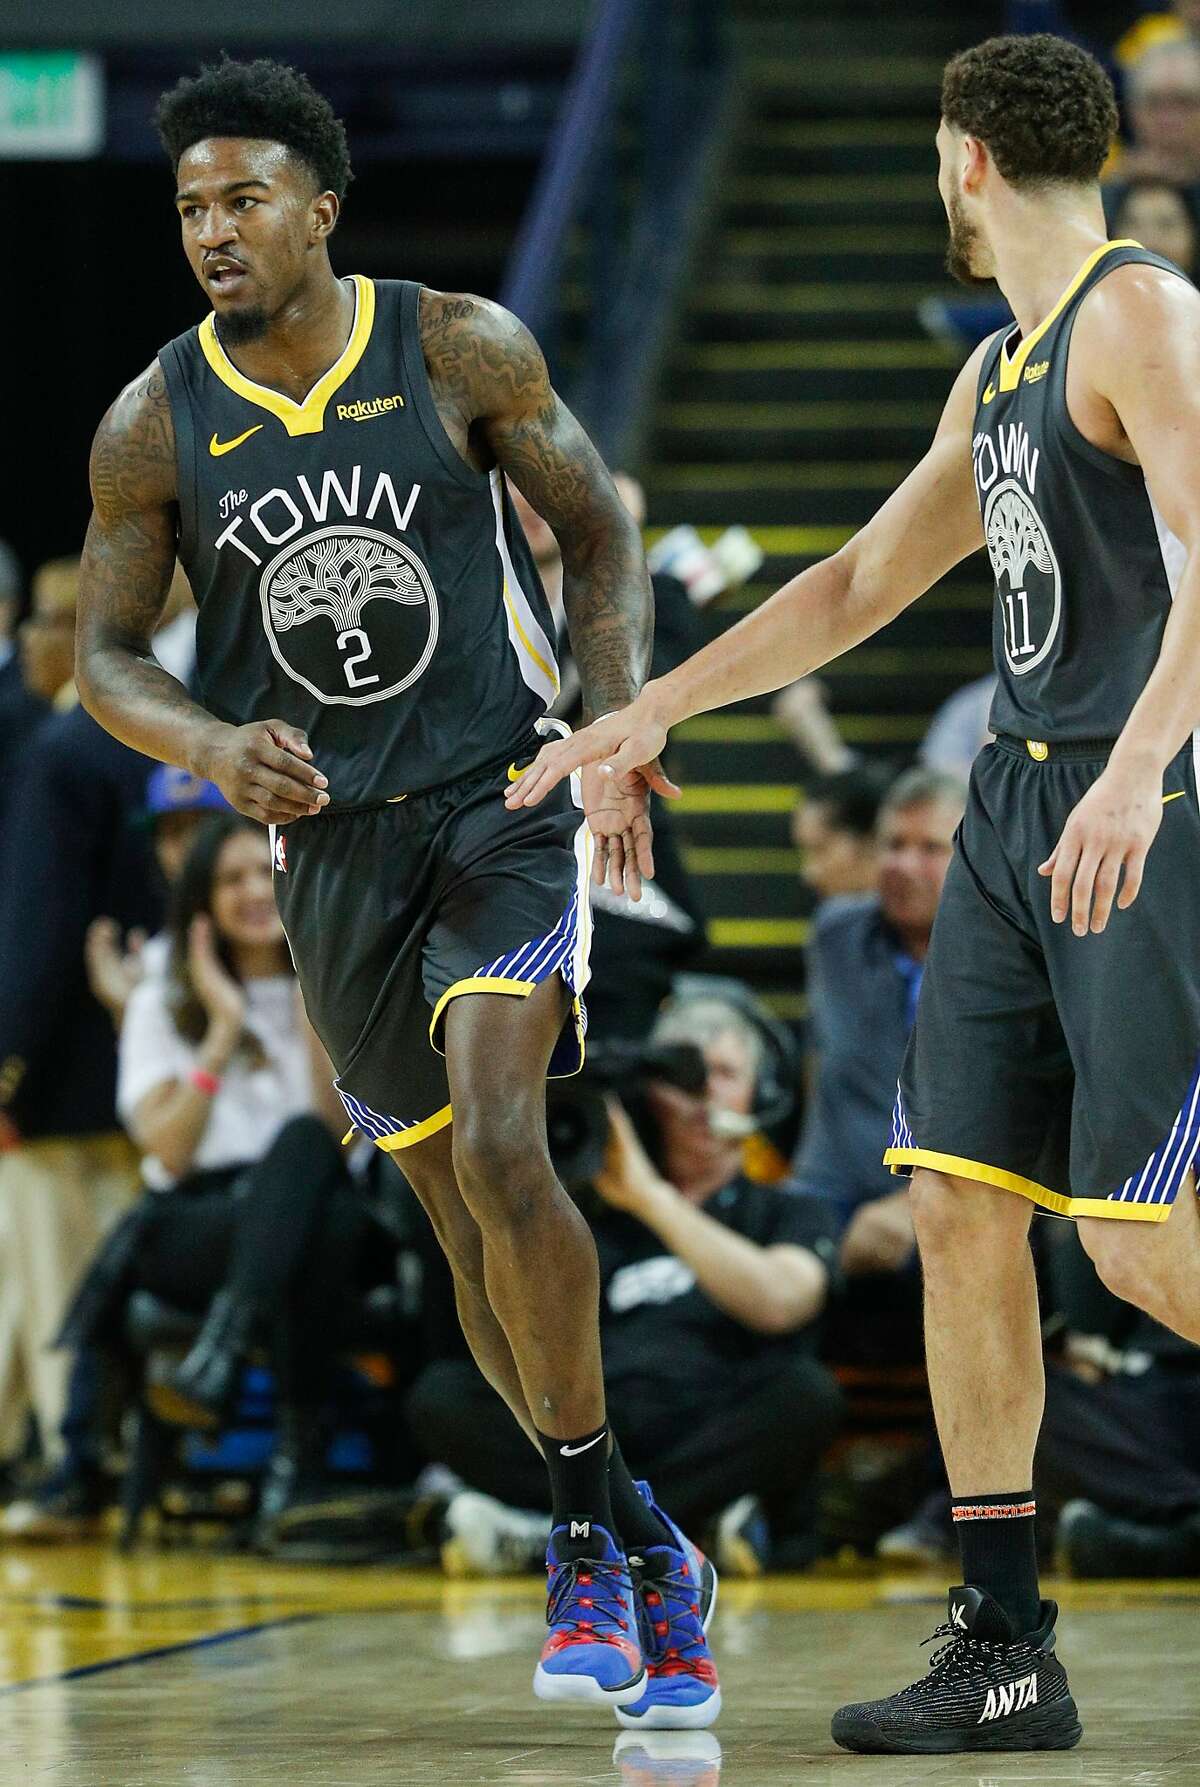 Golden State Warriors’ Jordan Bell gets a high five from Golden State Warriors’ Klay Thompson in the second quarter during game 2 of the Western Conference Finals between the Golden State Warriors and the Portland Trail Blazers at Oracle Arena on Thursday, May 16, 2019 in Oakland, Calif.